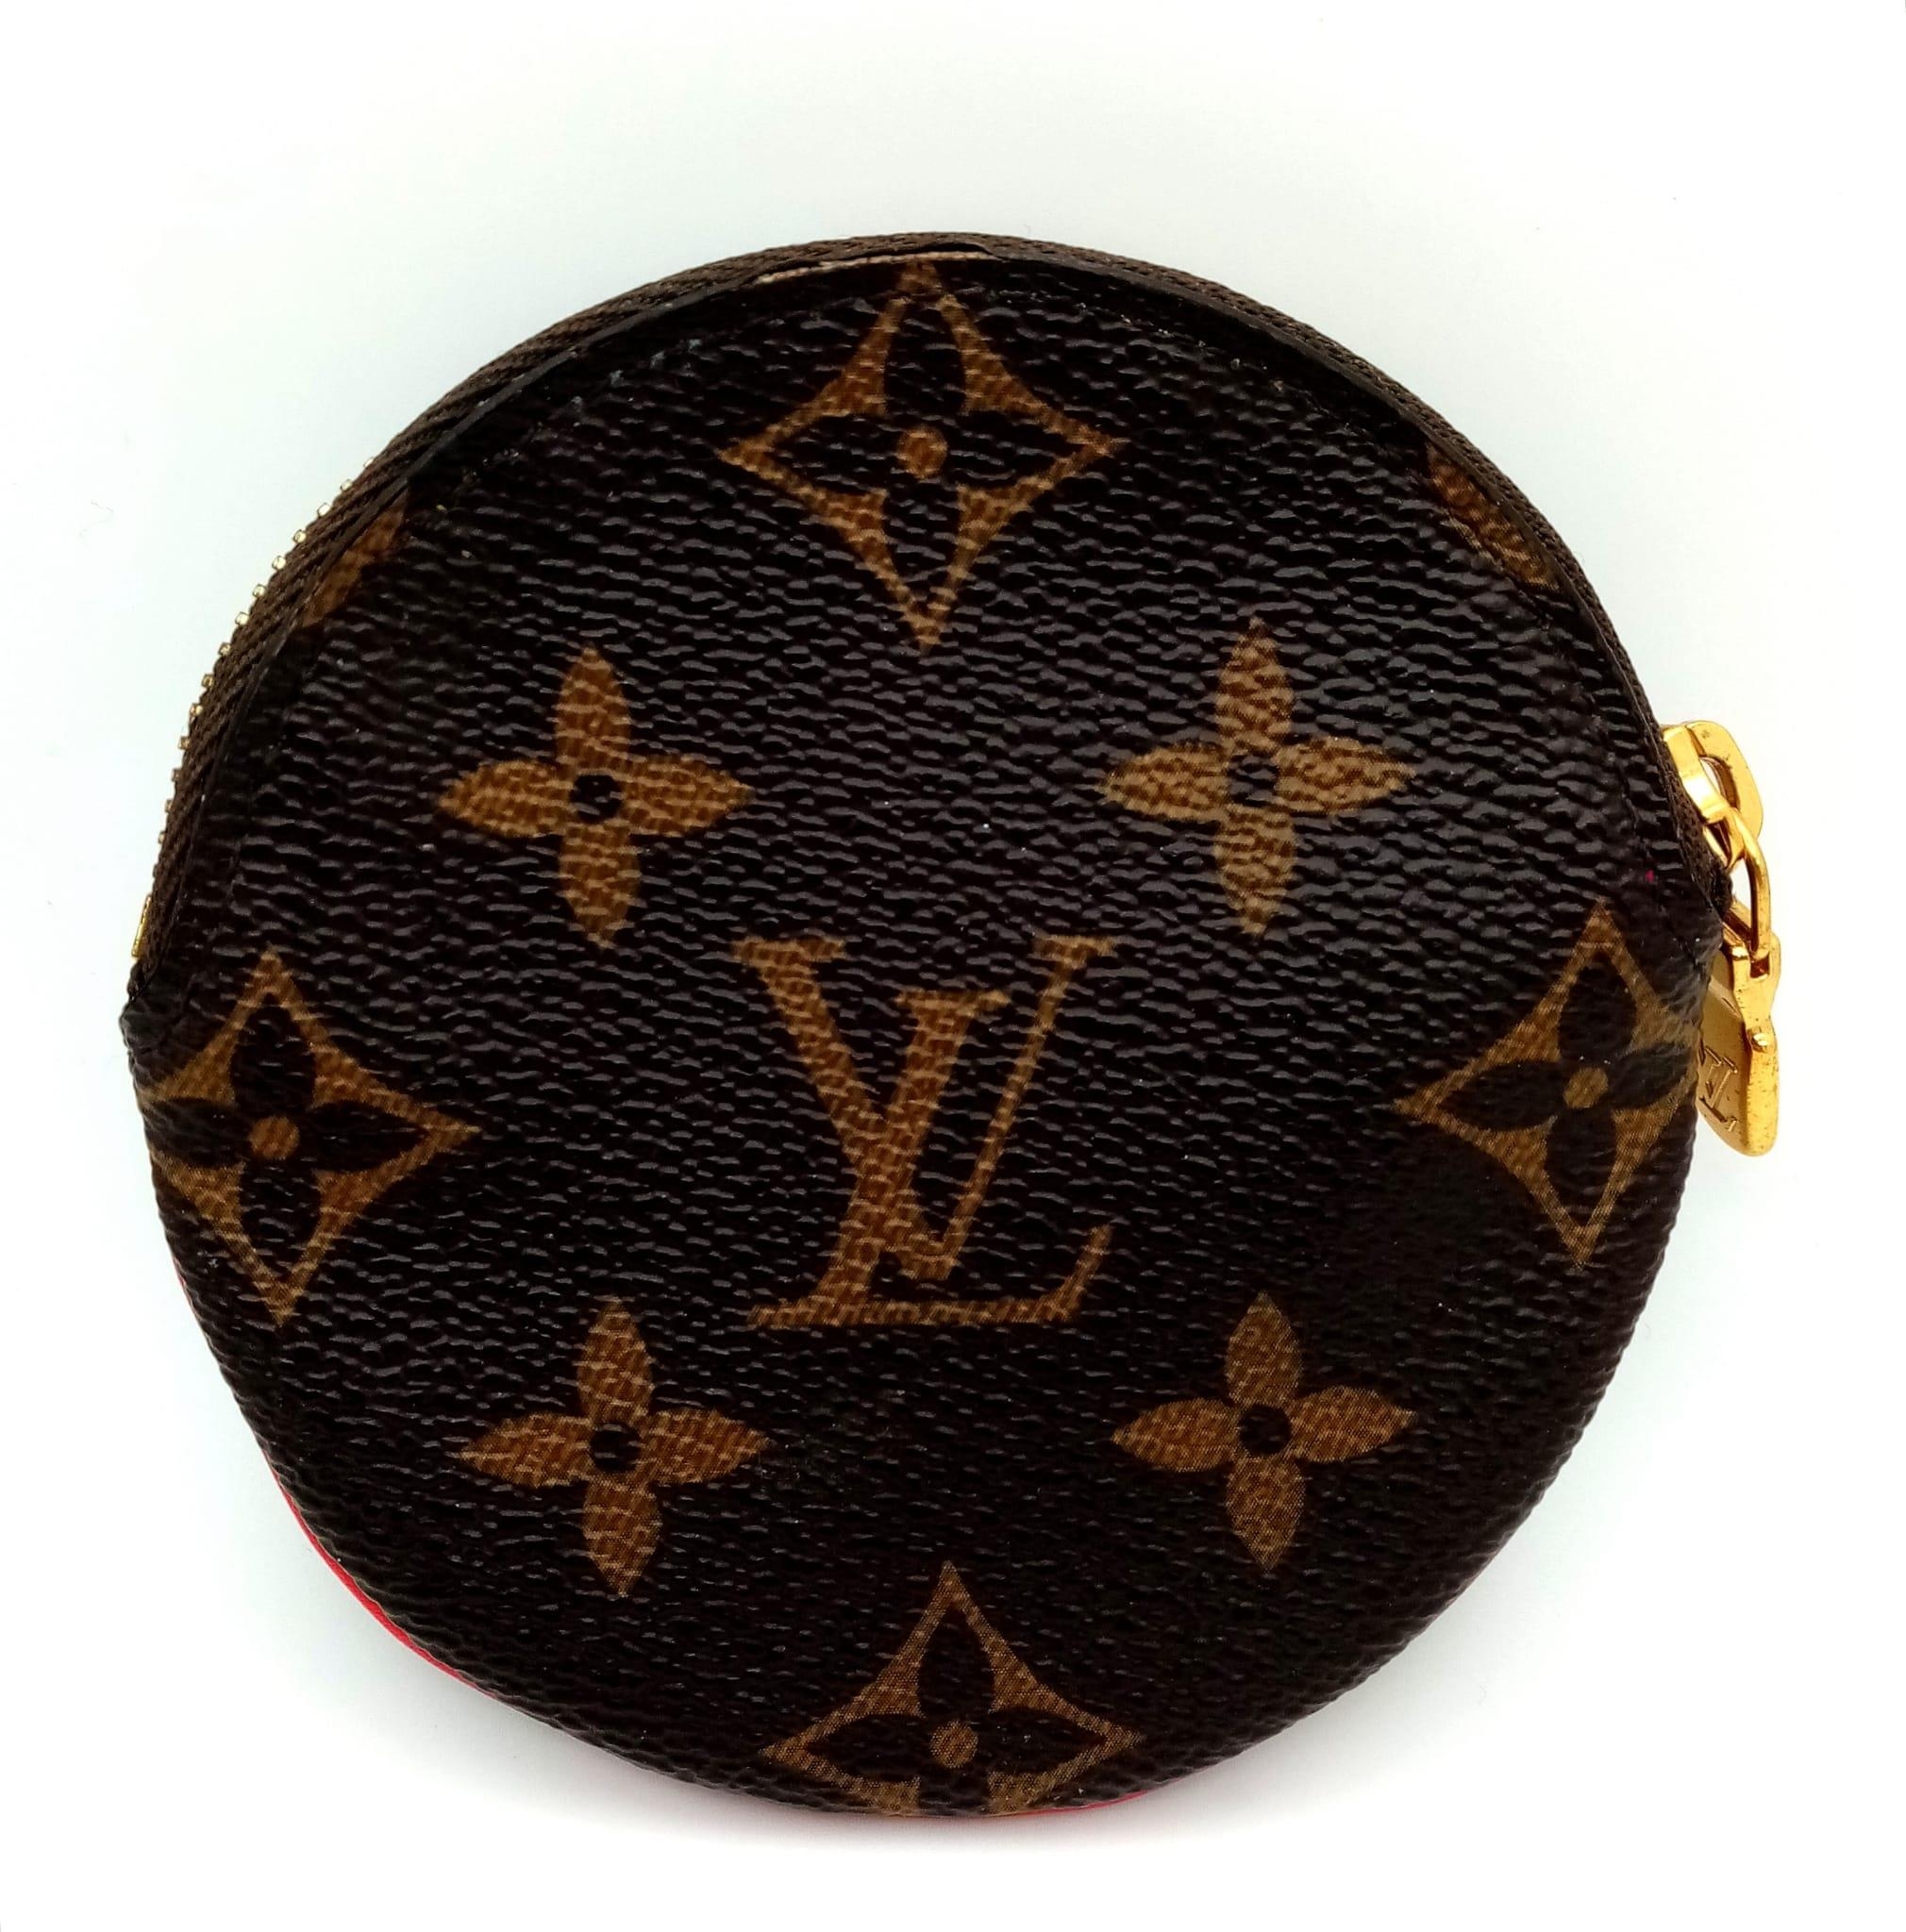 Louise Vuitton Coin Wallet, 2020 Christmas Animation Bumper Cars edition. LV monogrammed pattern,